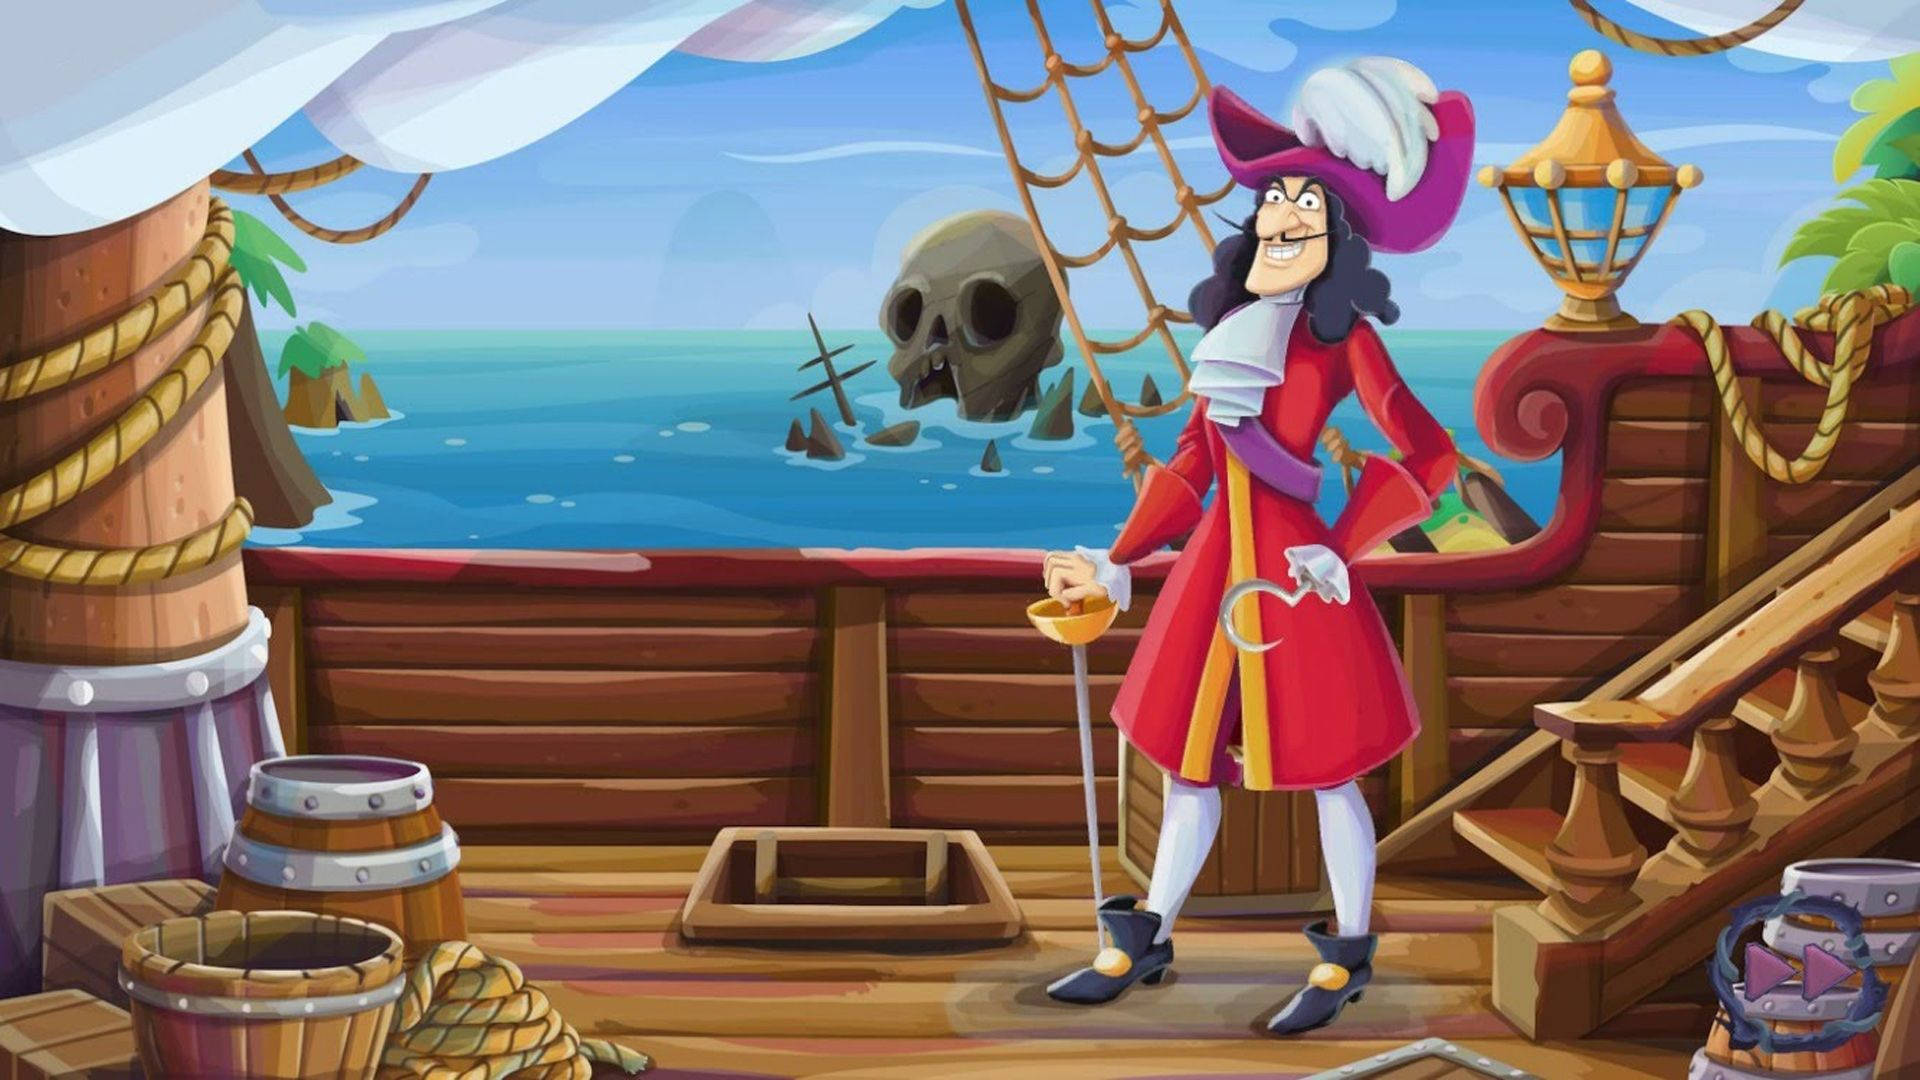 Download free Captain Hook In Pirate Boat Wallpaper 